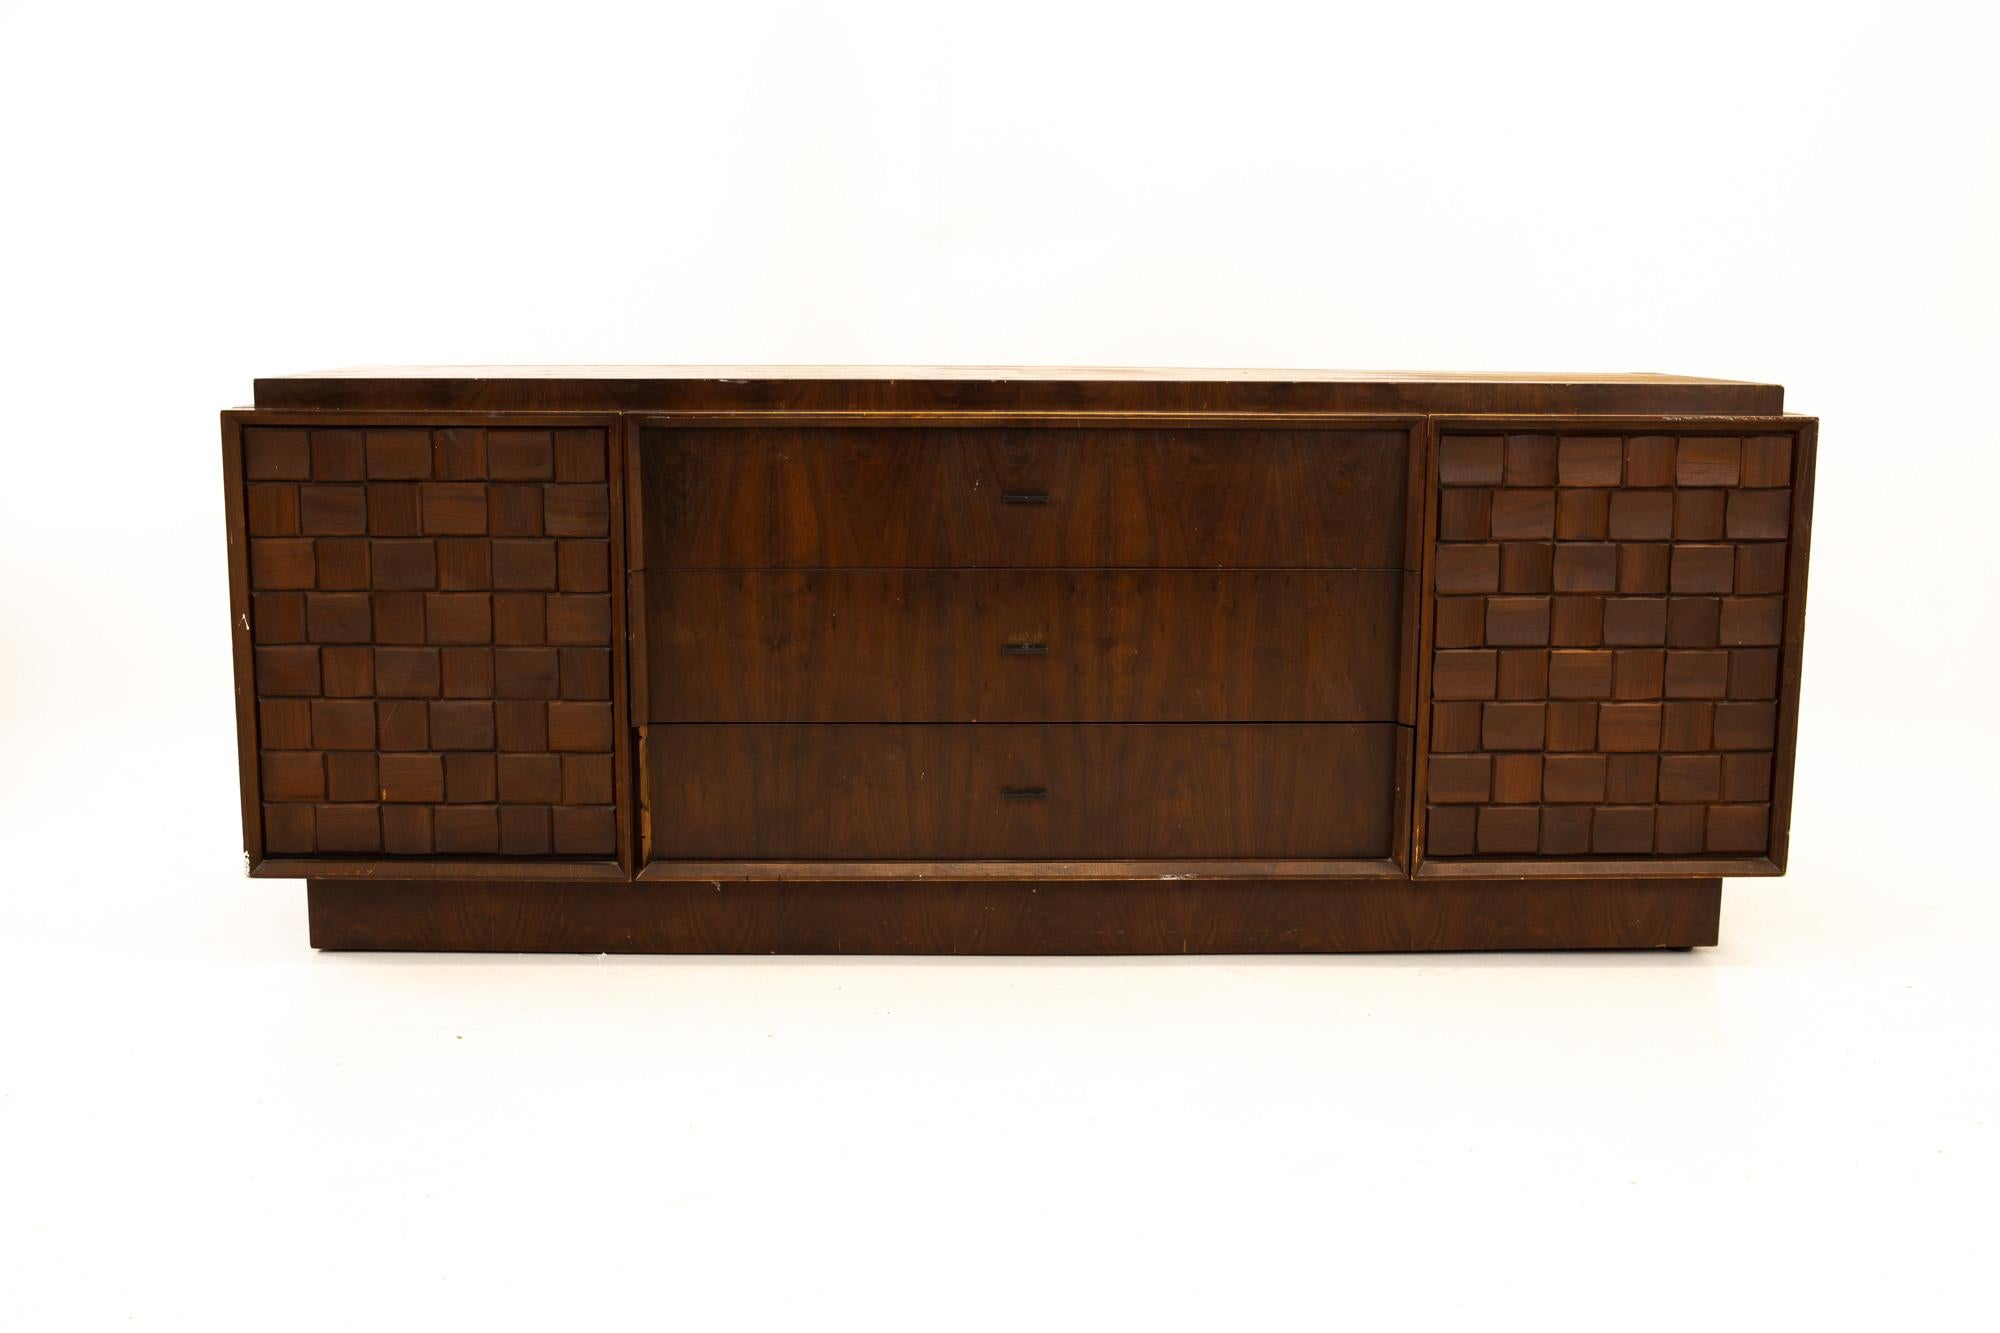 Paul Evans style Canadian Brutalist Mid Century walnut 9 drawer lowboy dresser

Dresser measures: 80 wide x 21 deep x 30.5 high

All pieces of furniture can be had in what we call restored vintage condition. That means the piece is restored upon